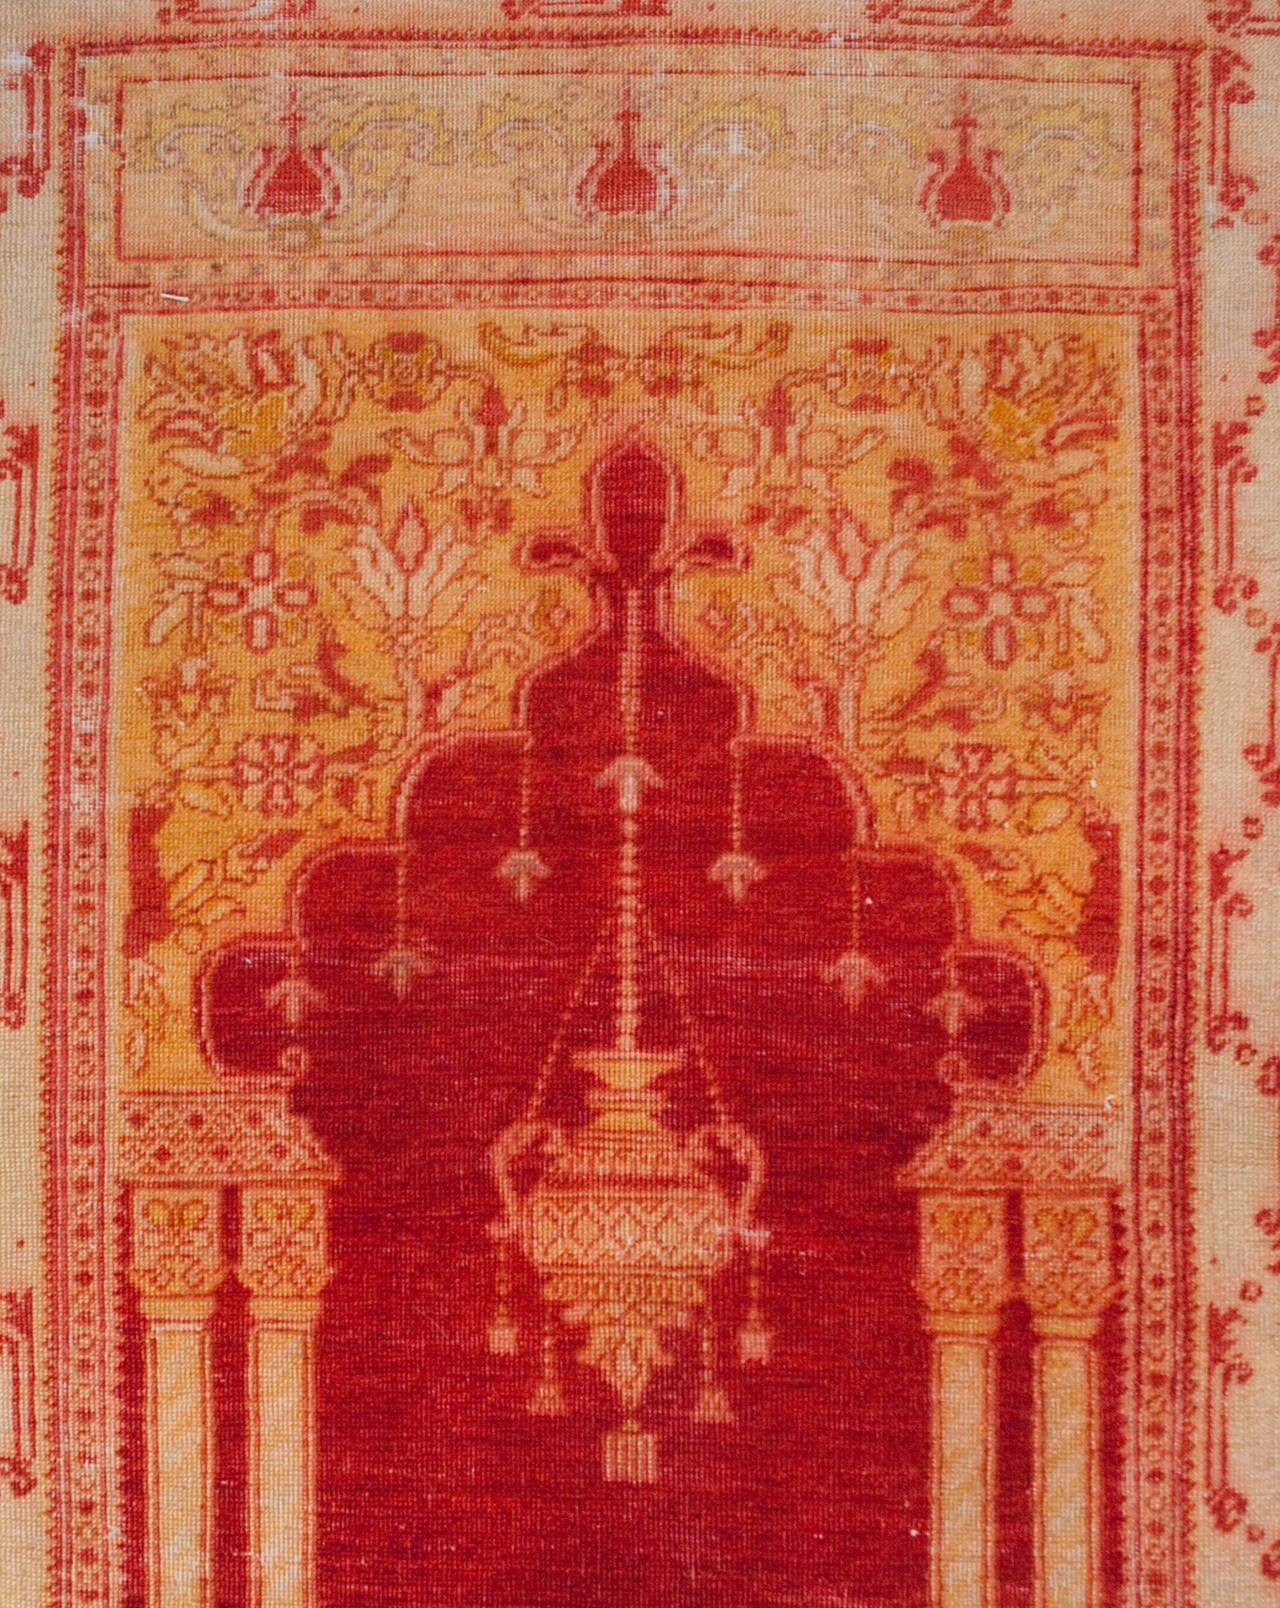 An early 20th century Turkish Oushak prayer rug with a beautifully rendered architectural central field with an Islamic arch and columns, surrounded by a contrasting floral border.